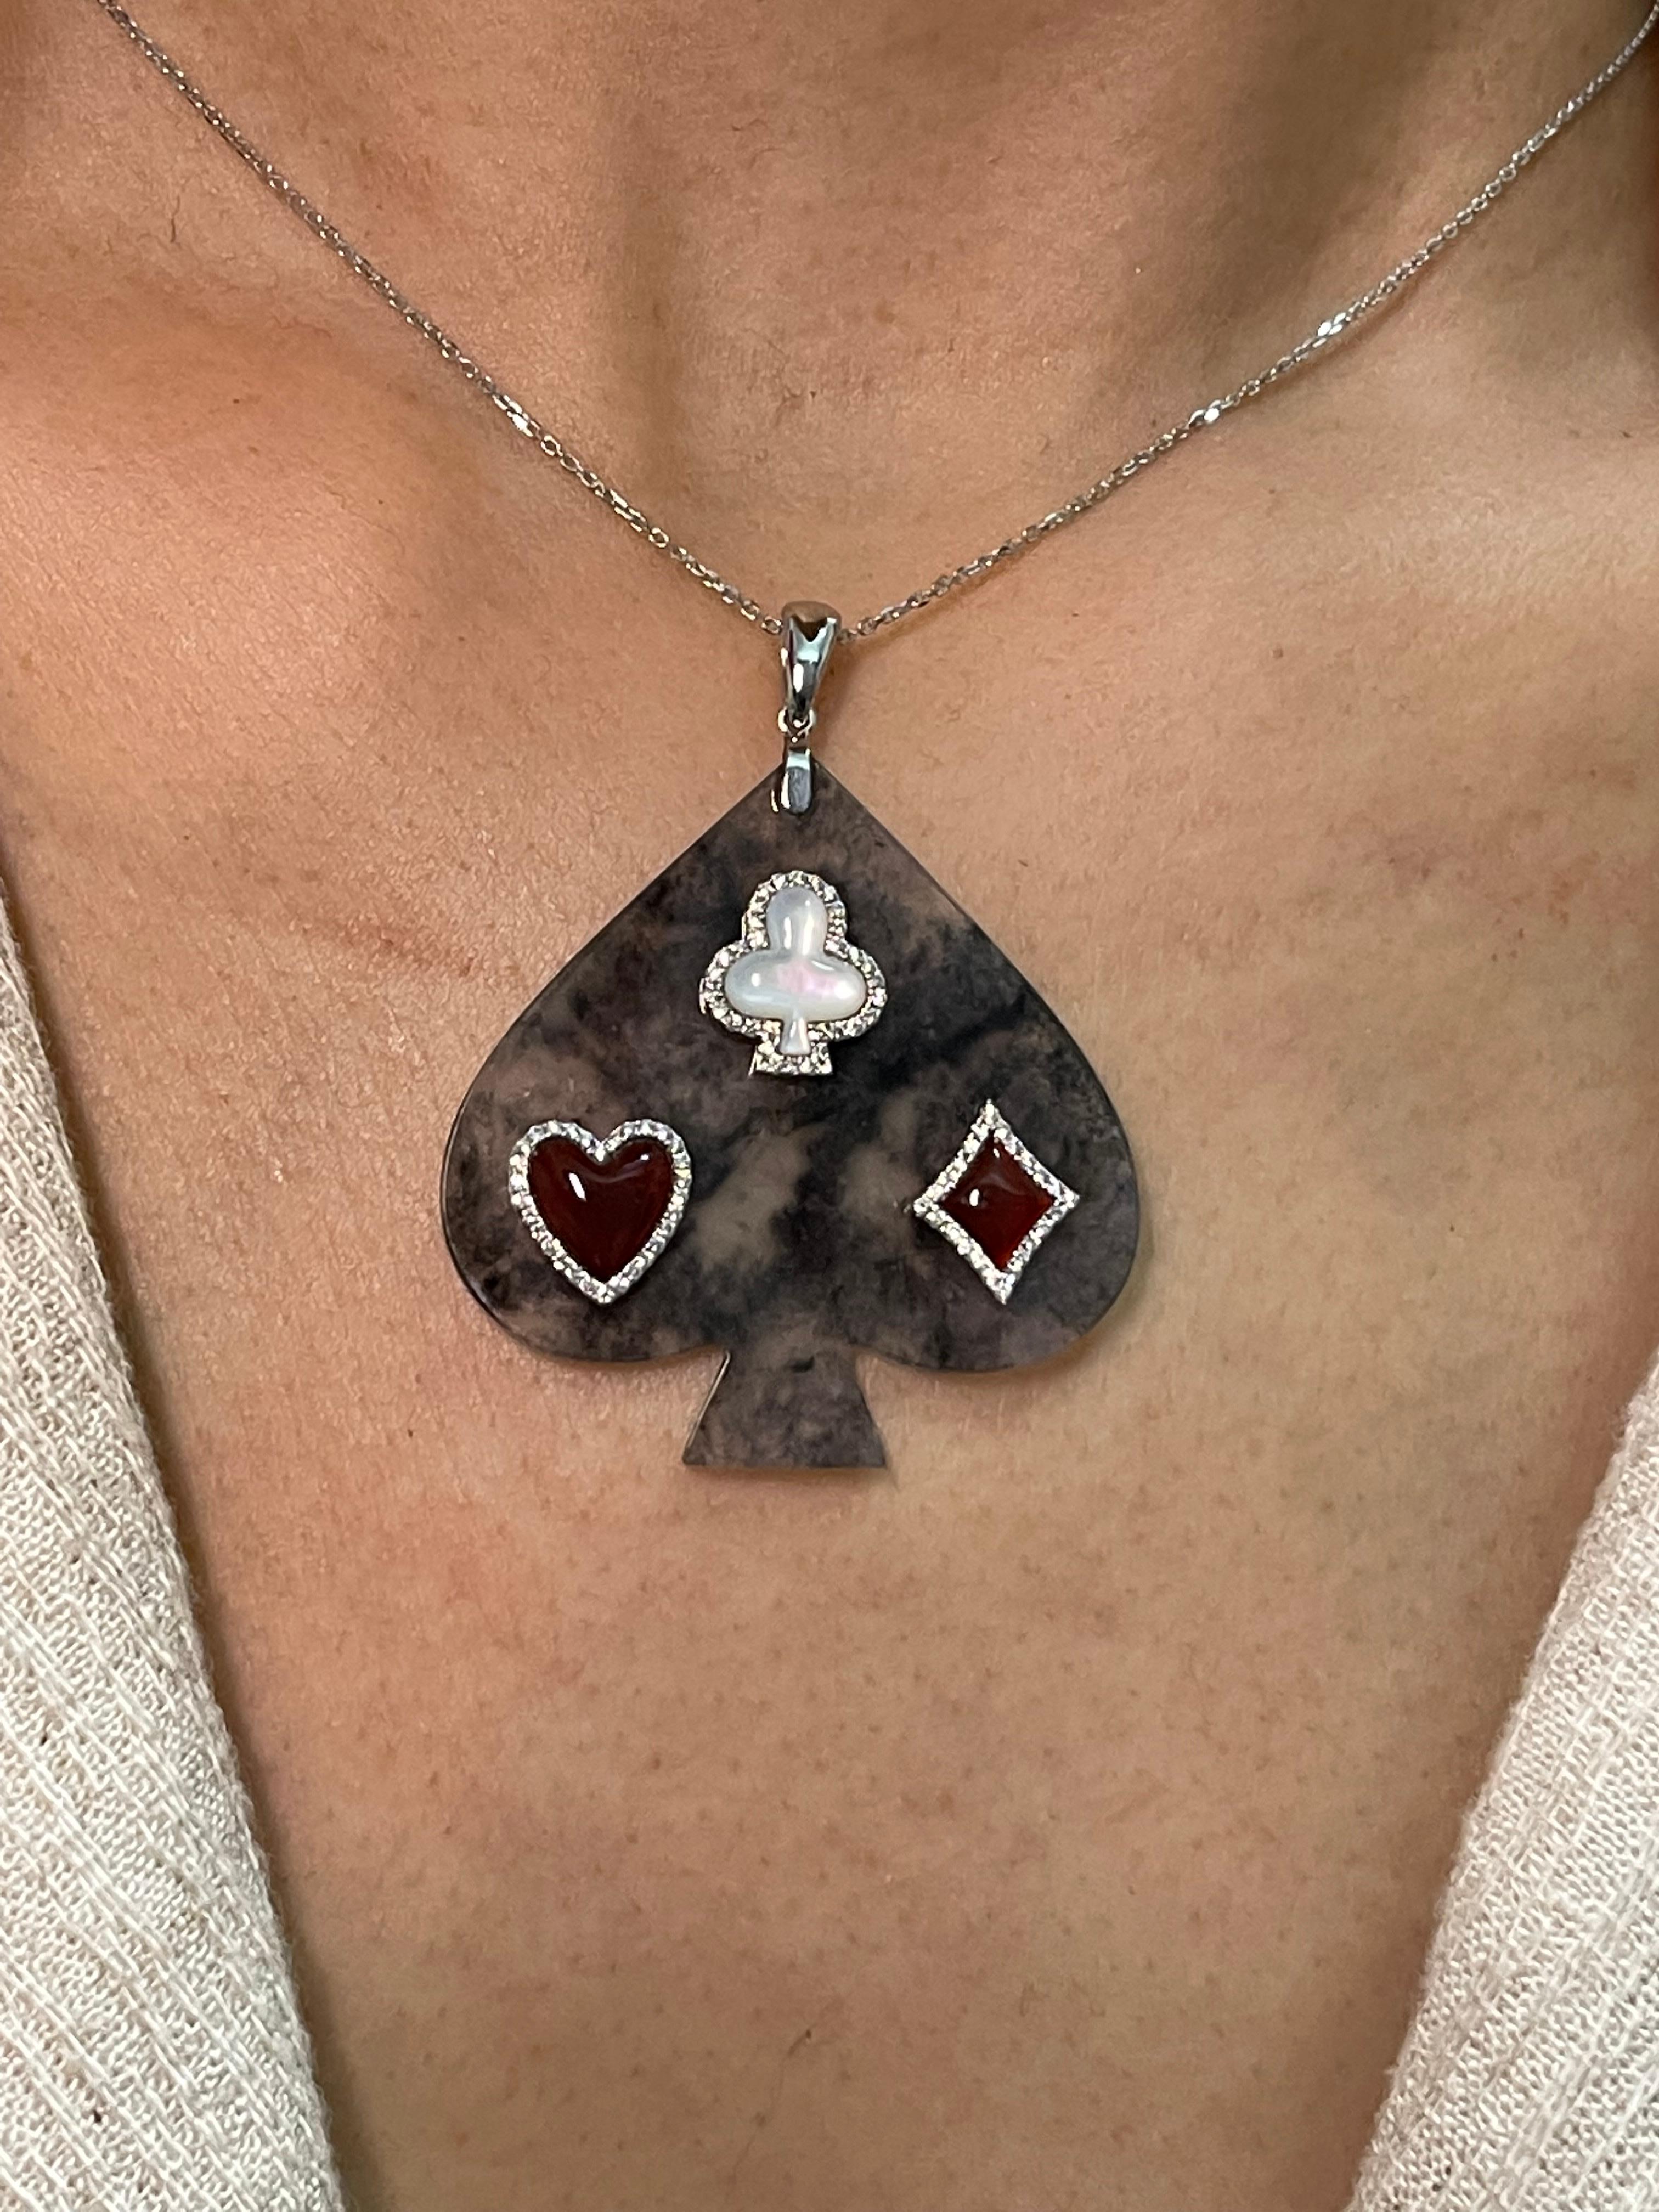 Please check out the HD video! Unique to only one piece! This is the perfect icy black jade. It is a specialty cut jade with custom cut mother of pearl, custom cut red agate and diamonds. Perfect for that poker player or card shark! Icy black jade